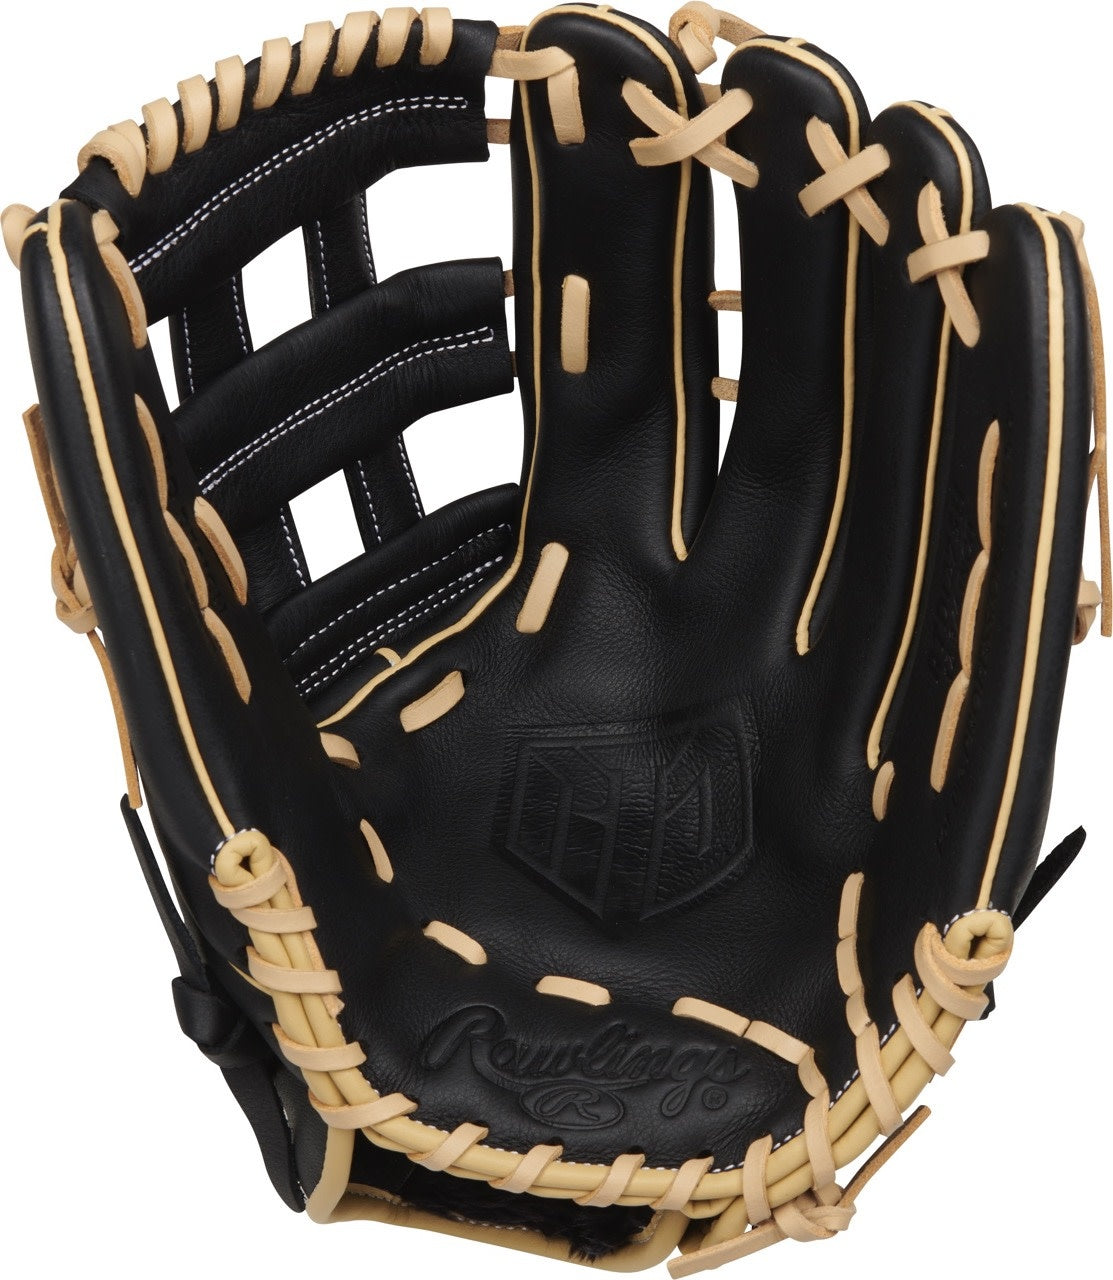 Rawlings Player Preferred RTD Outfielders Glove 12 3/4"